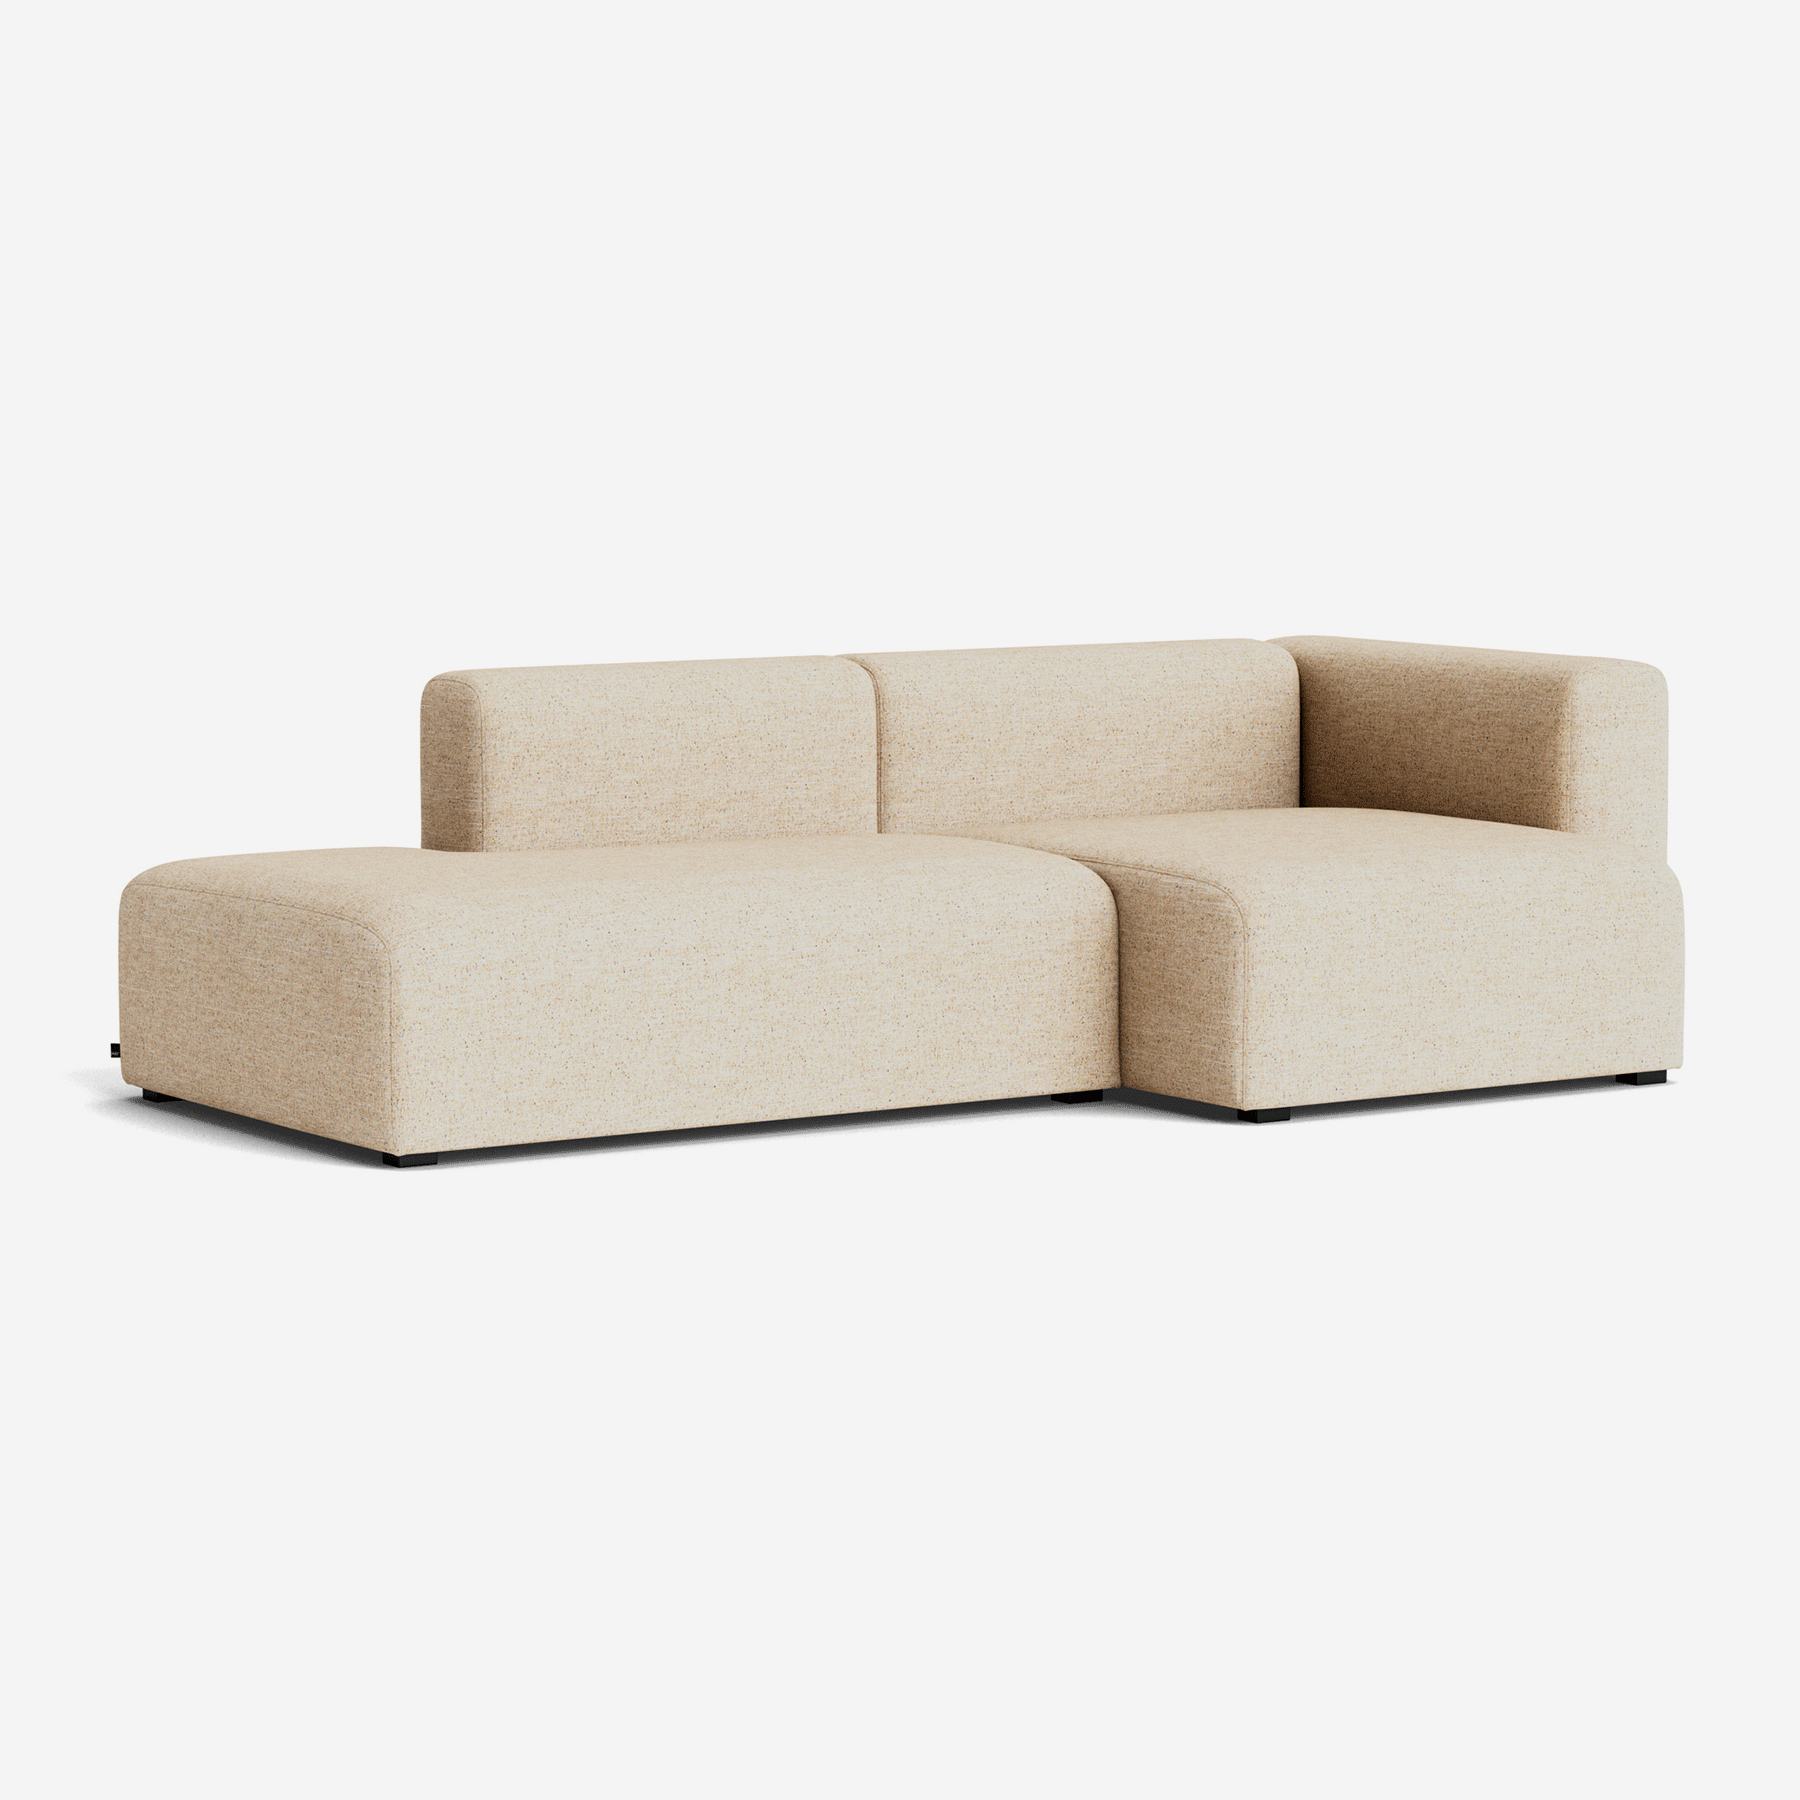 Mags 2,5 Seater Sofa, Combination 3